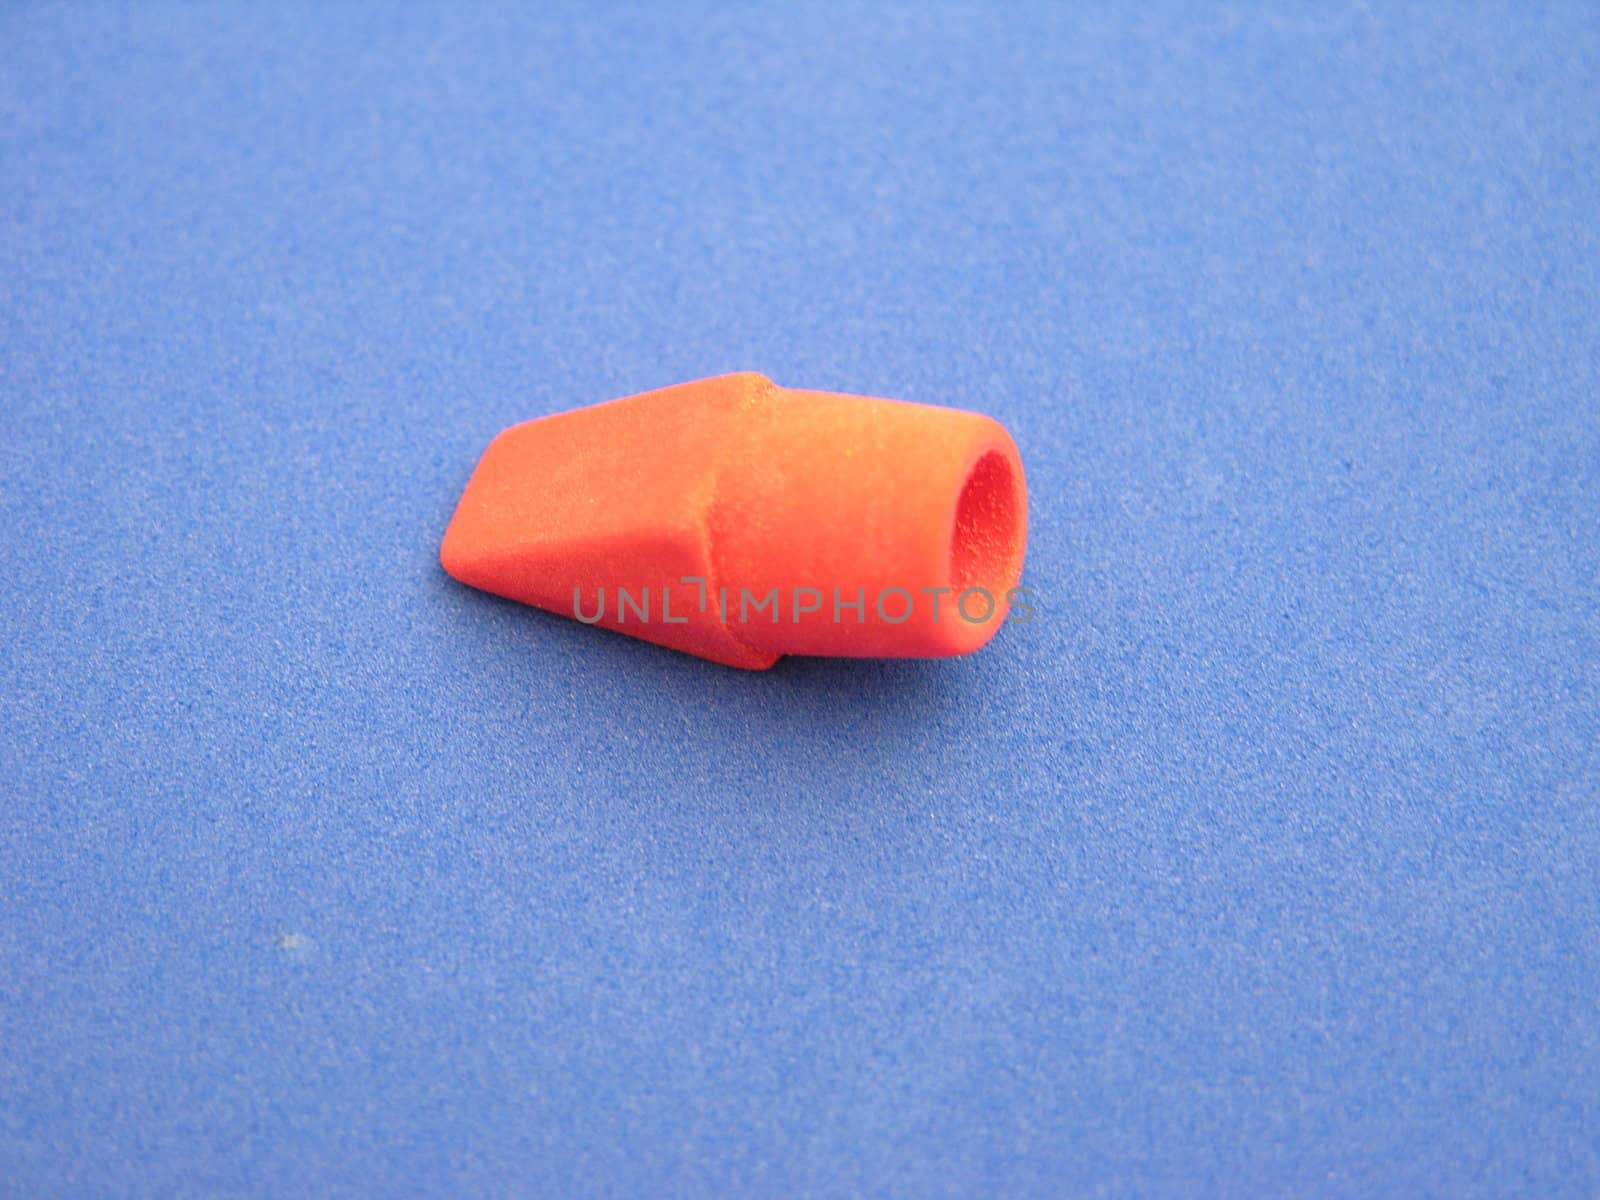 A red eraser top on a blue background